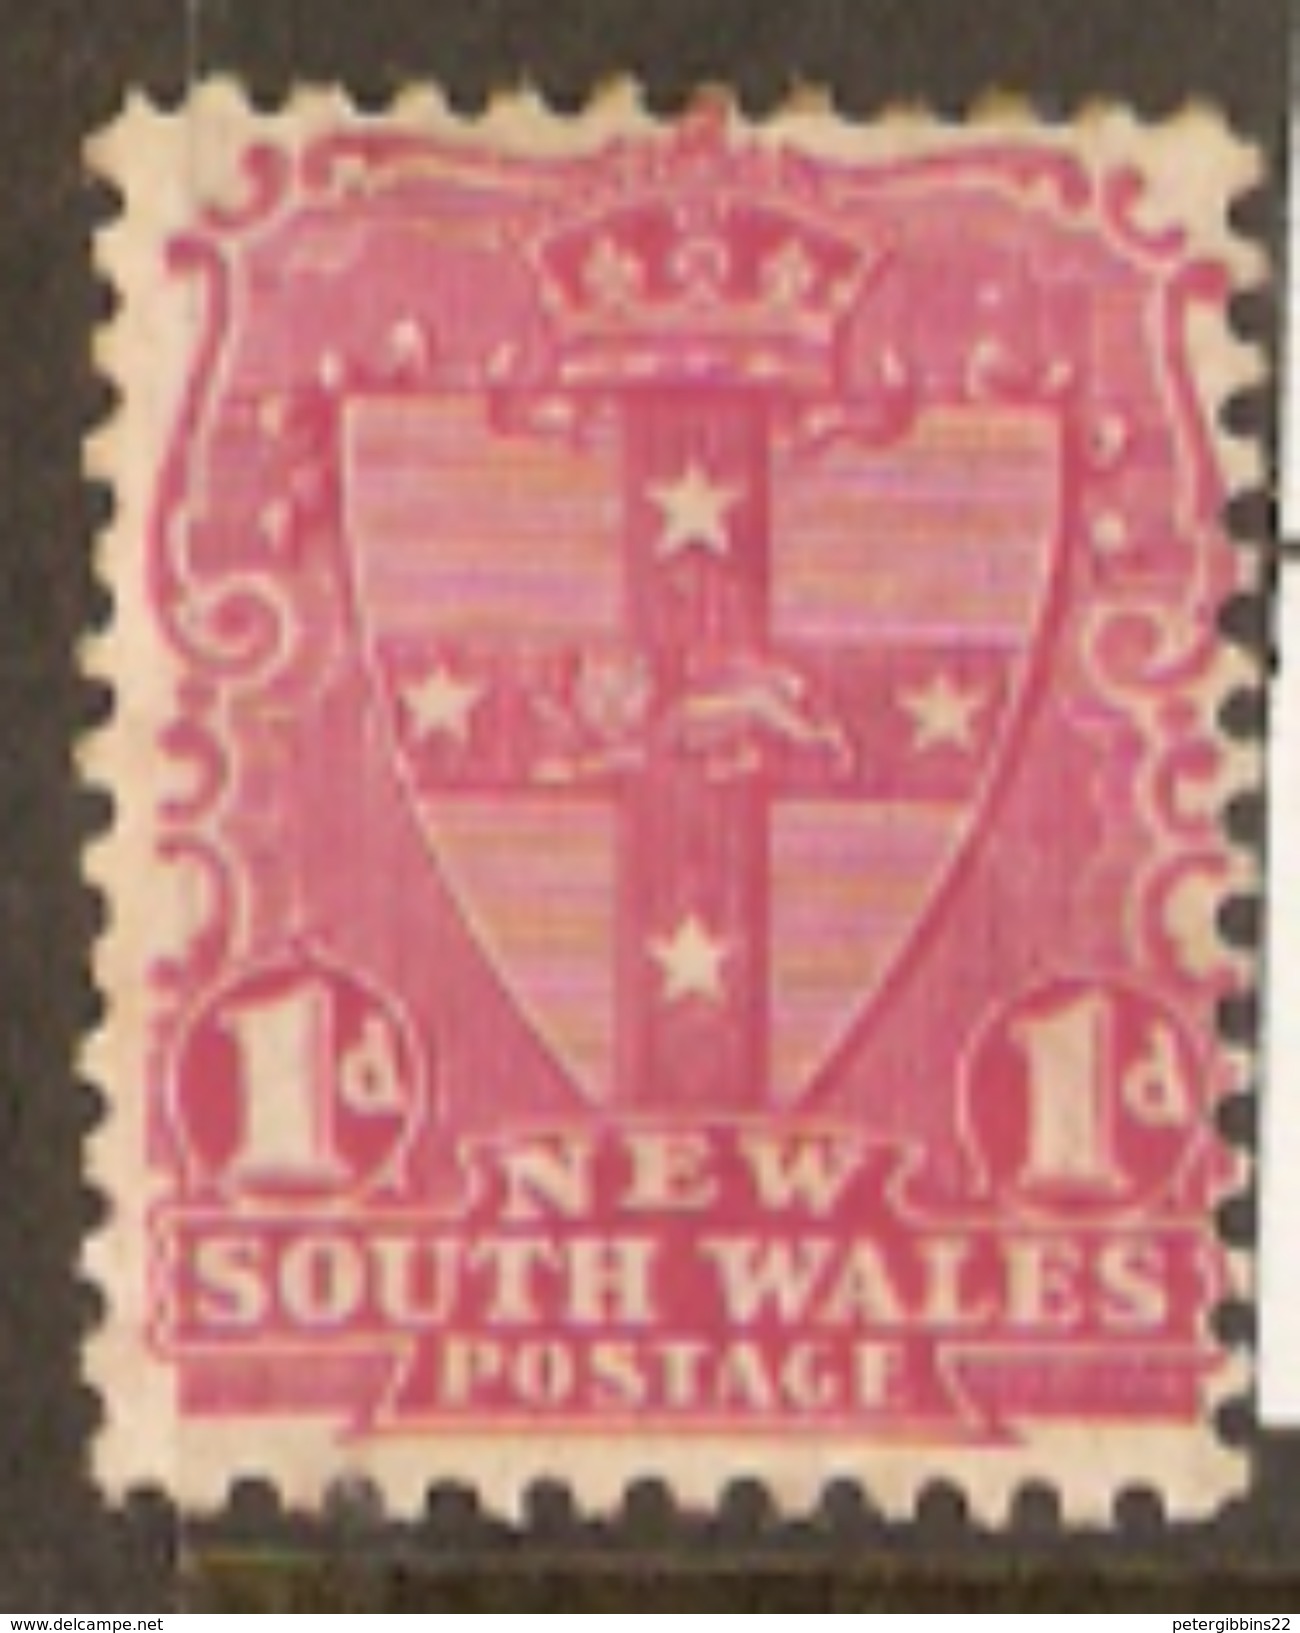 New South Wales 1897 SG 291 1d Mounted Mint - Ungebraucht